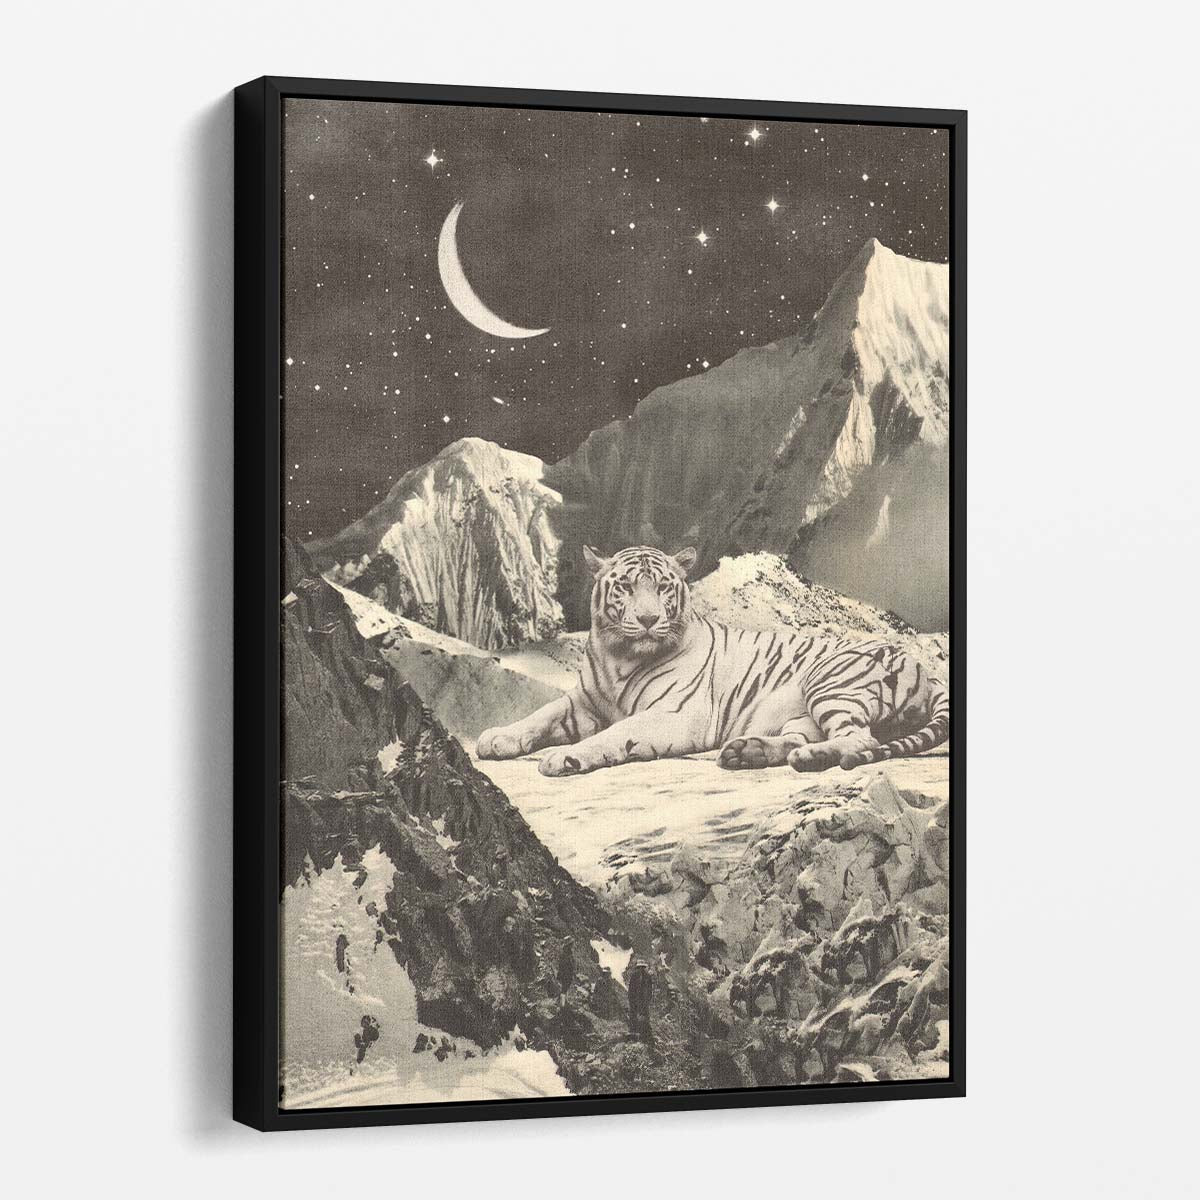 Winter Landscape Tiger Illustration Snowy Mountains & Starry Night Sky by Luxuriance Designs, made in USA